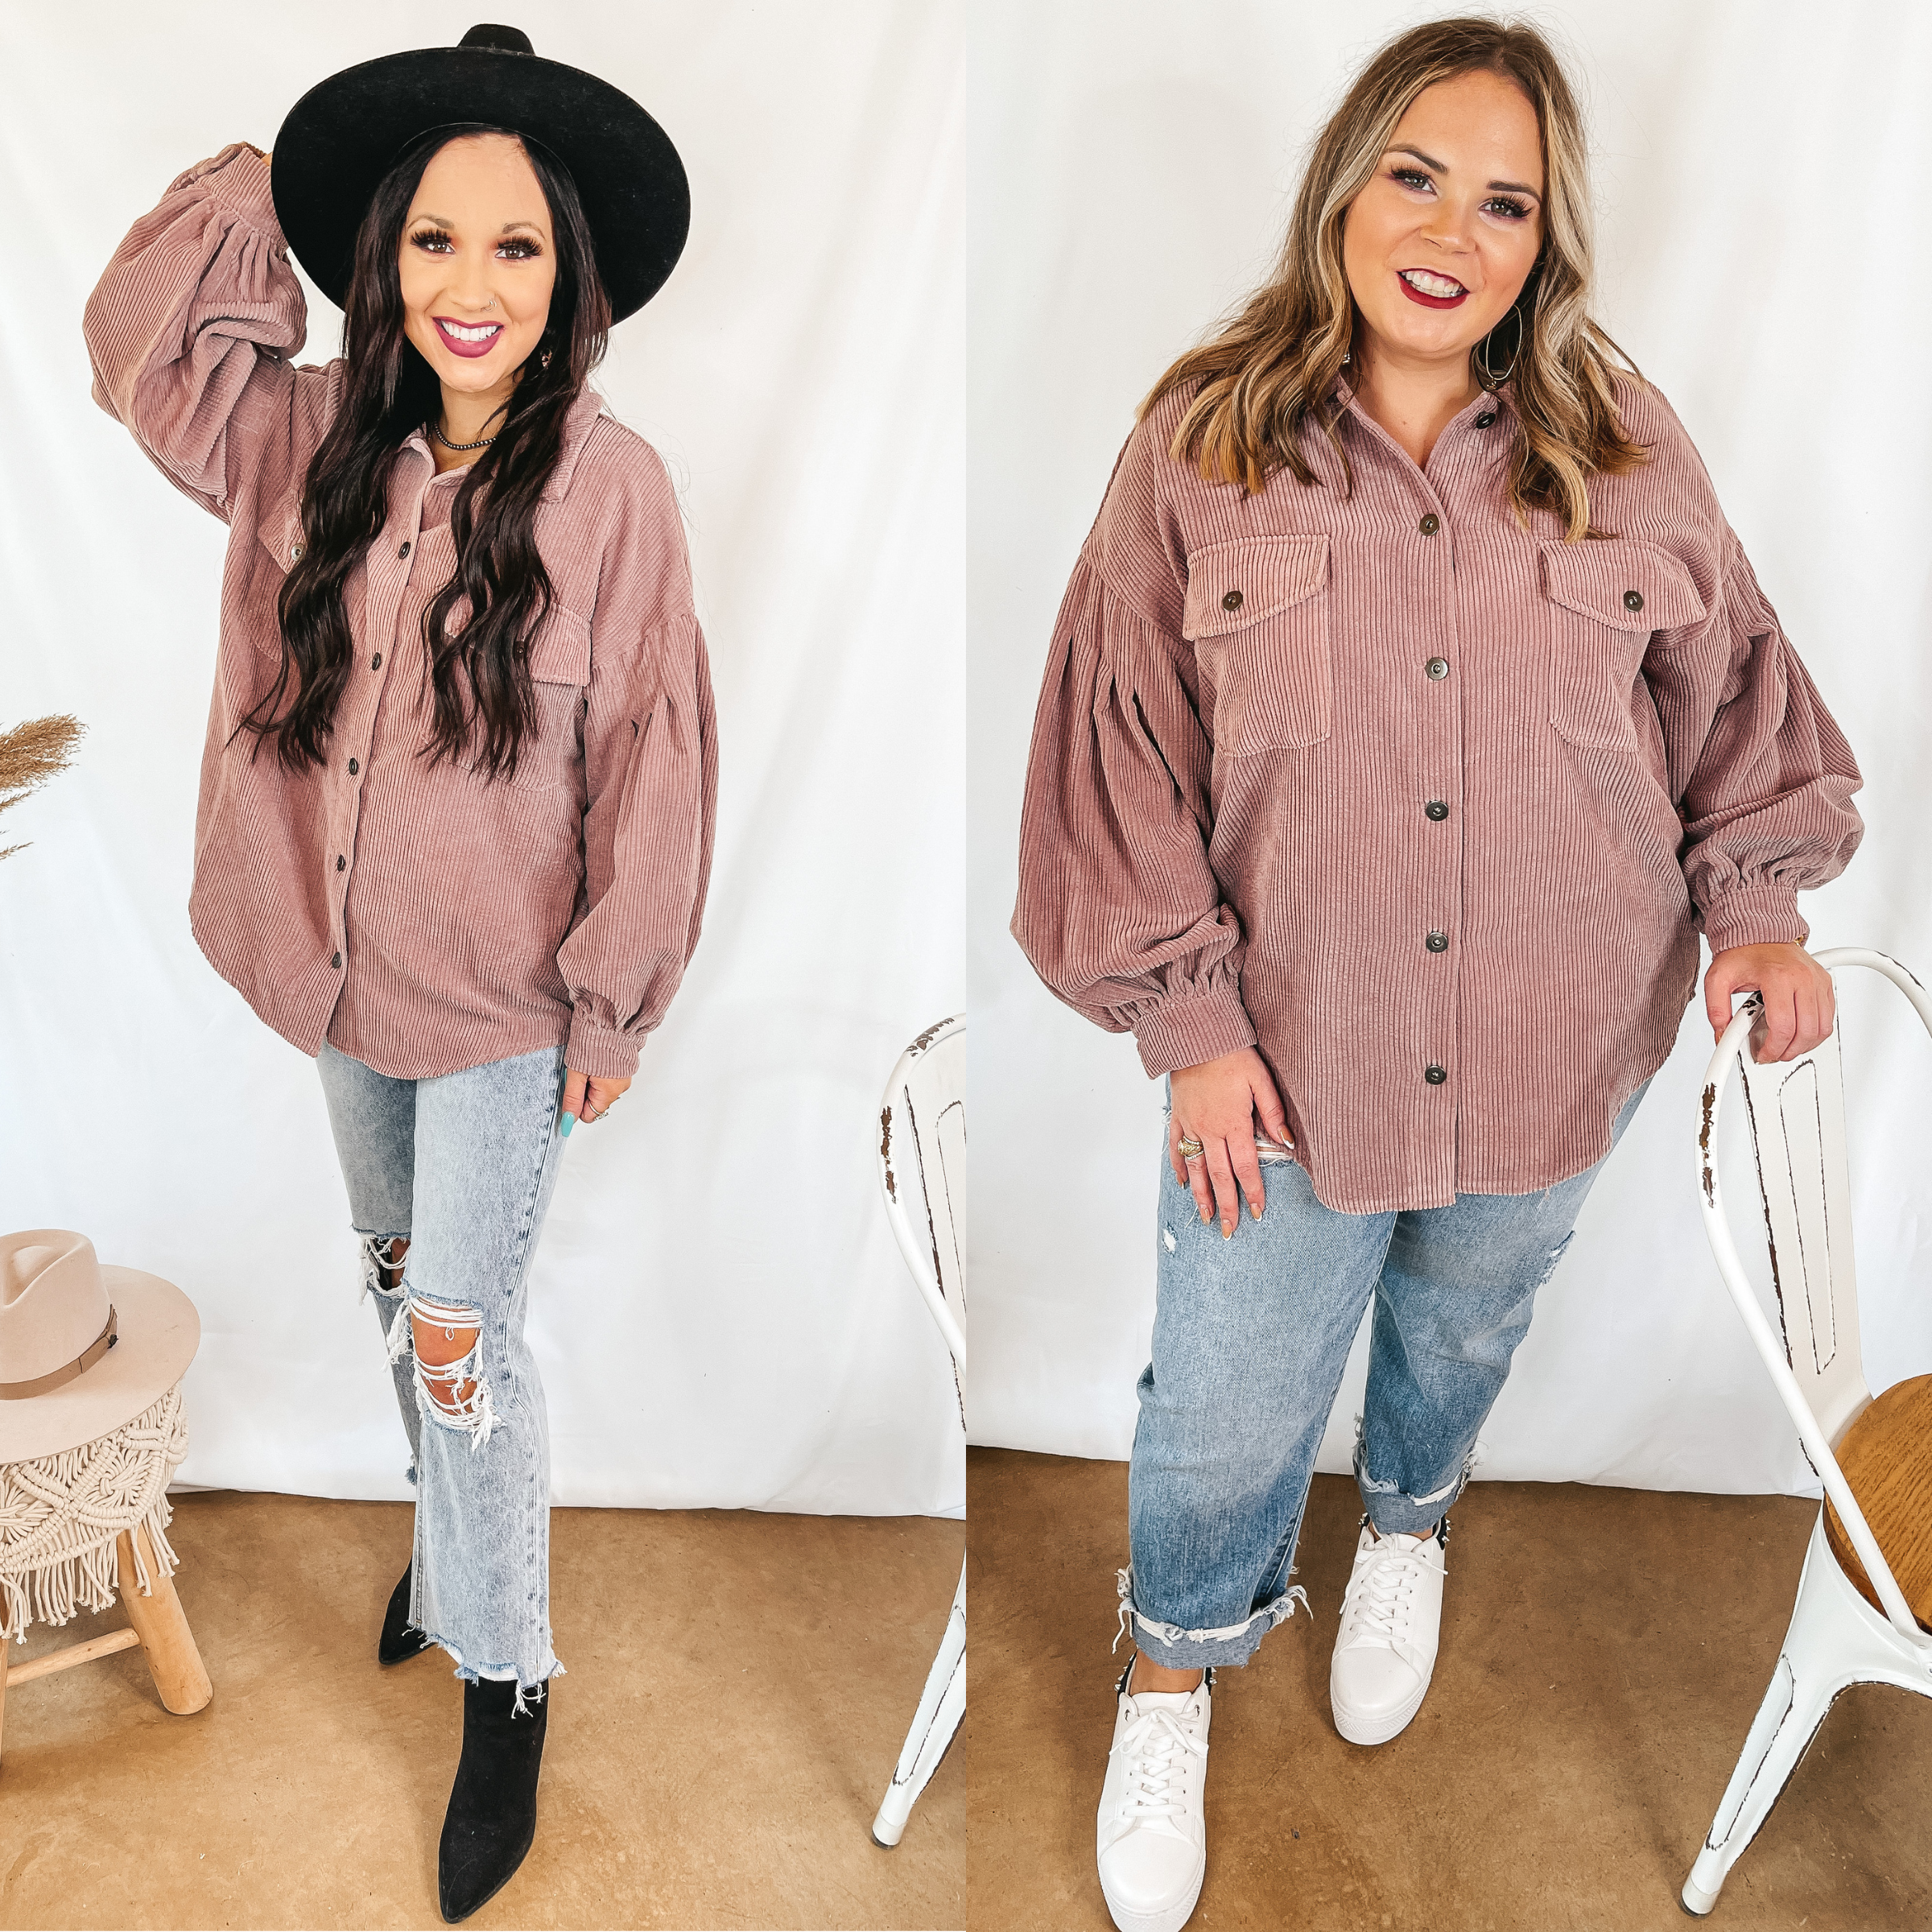 Models are wearing an oversized button up top that is corduroy material. Both model have this mauve top paired with light wash jeans. Size small model has it paired with black booties and a black hat. Size large model has it paired with white sneakers and silver jewelry.